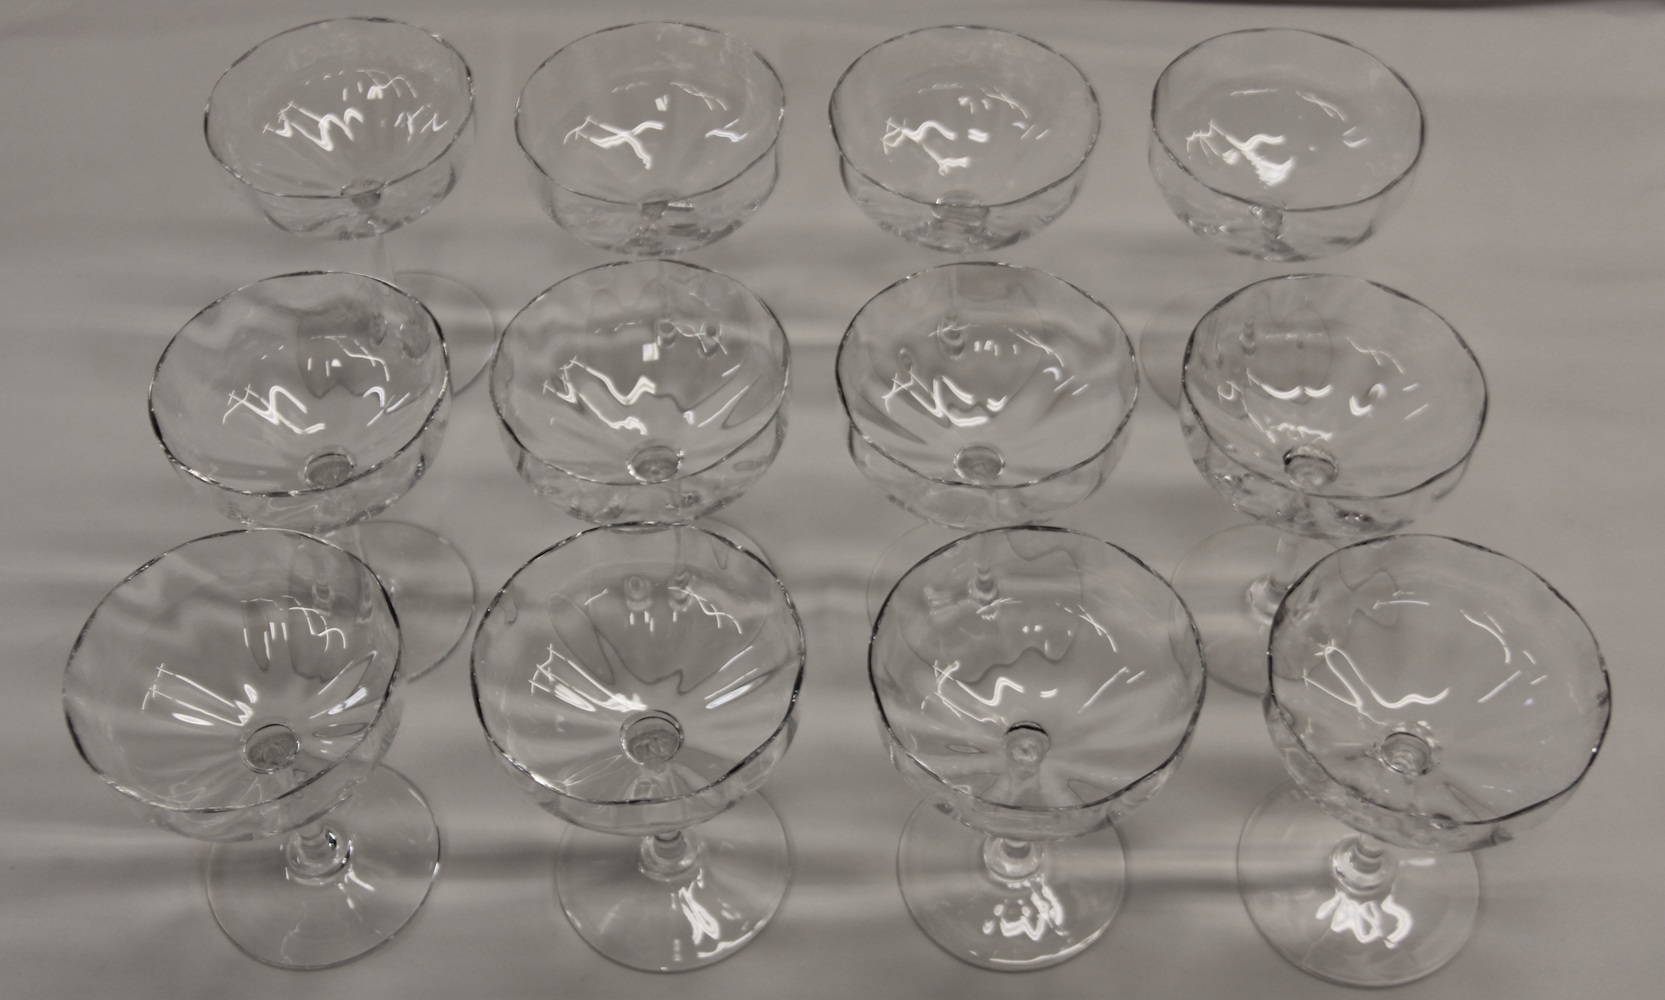 MINT Vintage 1970's Crystal Baccarat Coupe Champagne Glasses 